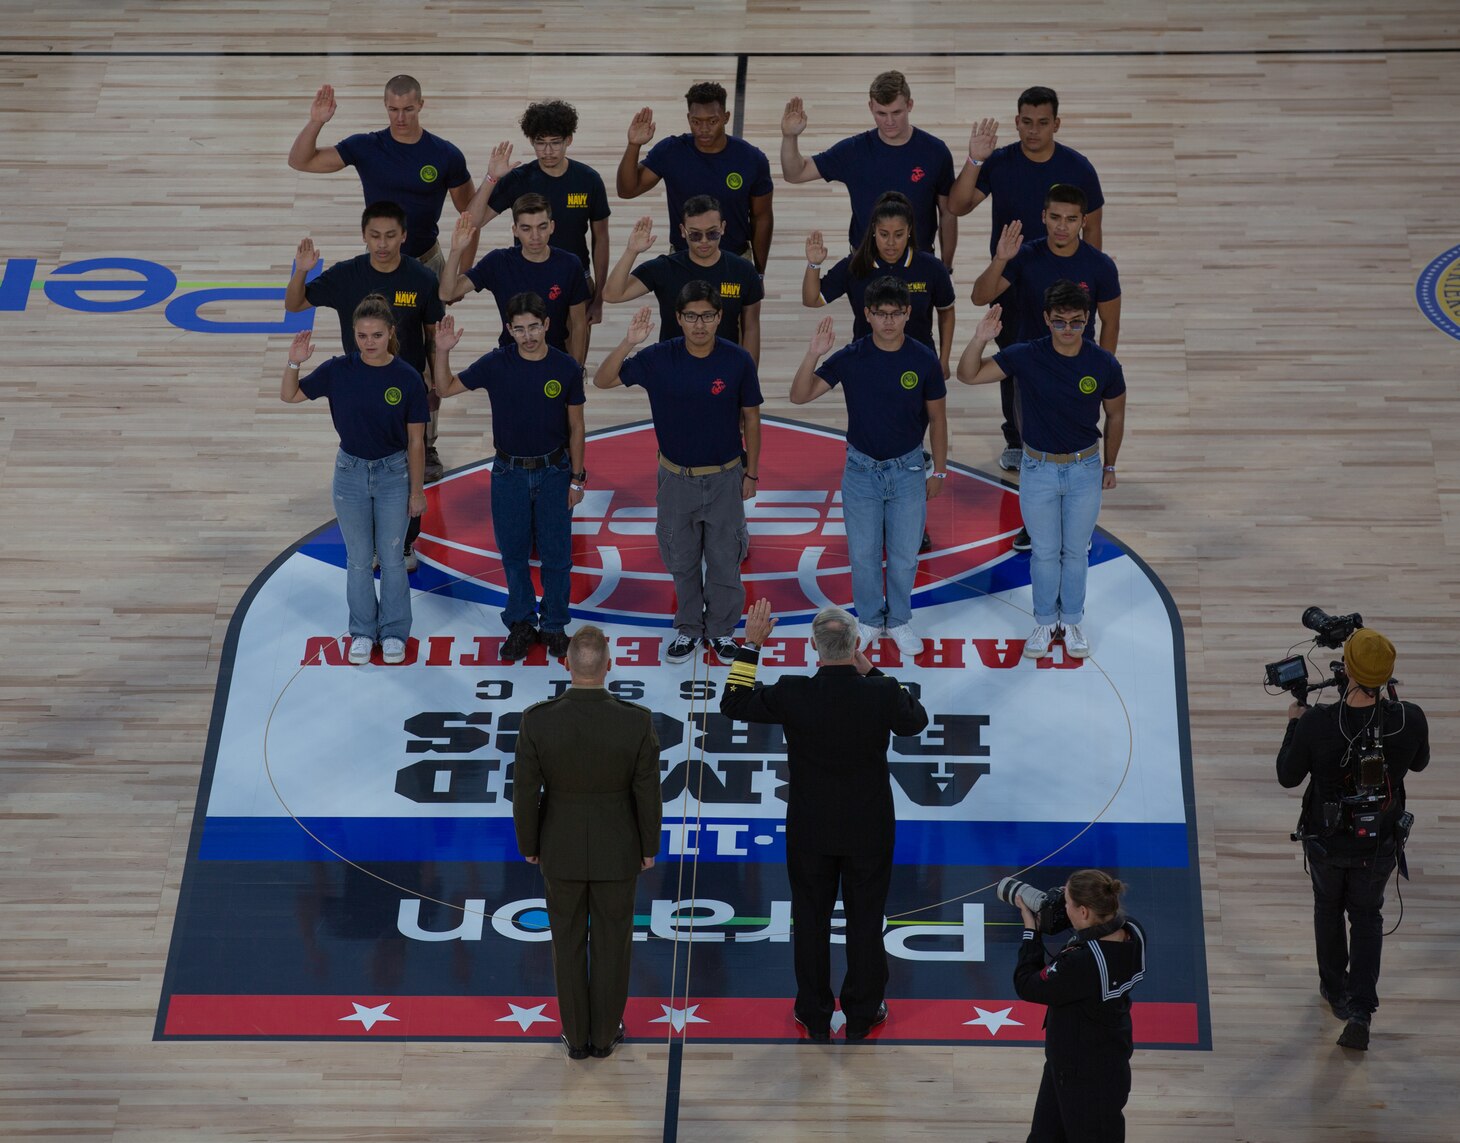 Vice Adm. Whitesell delivers the oath of enlistment during the 2022 ESPN Armed Forces Classic - Carrier Edition, aboard USS Abraham Lincoln (CVN 72) at Naval Air Station North Island.